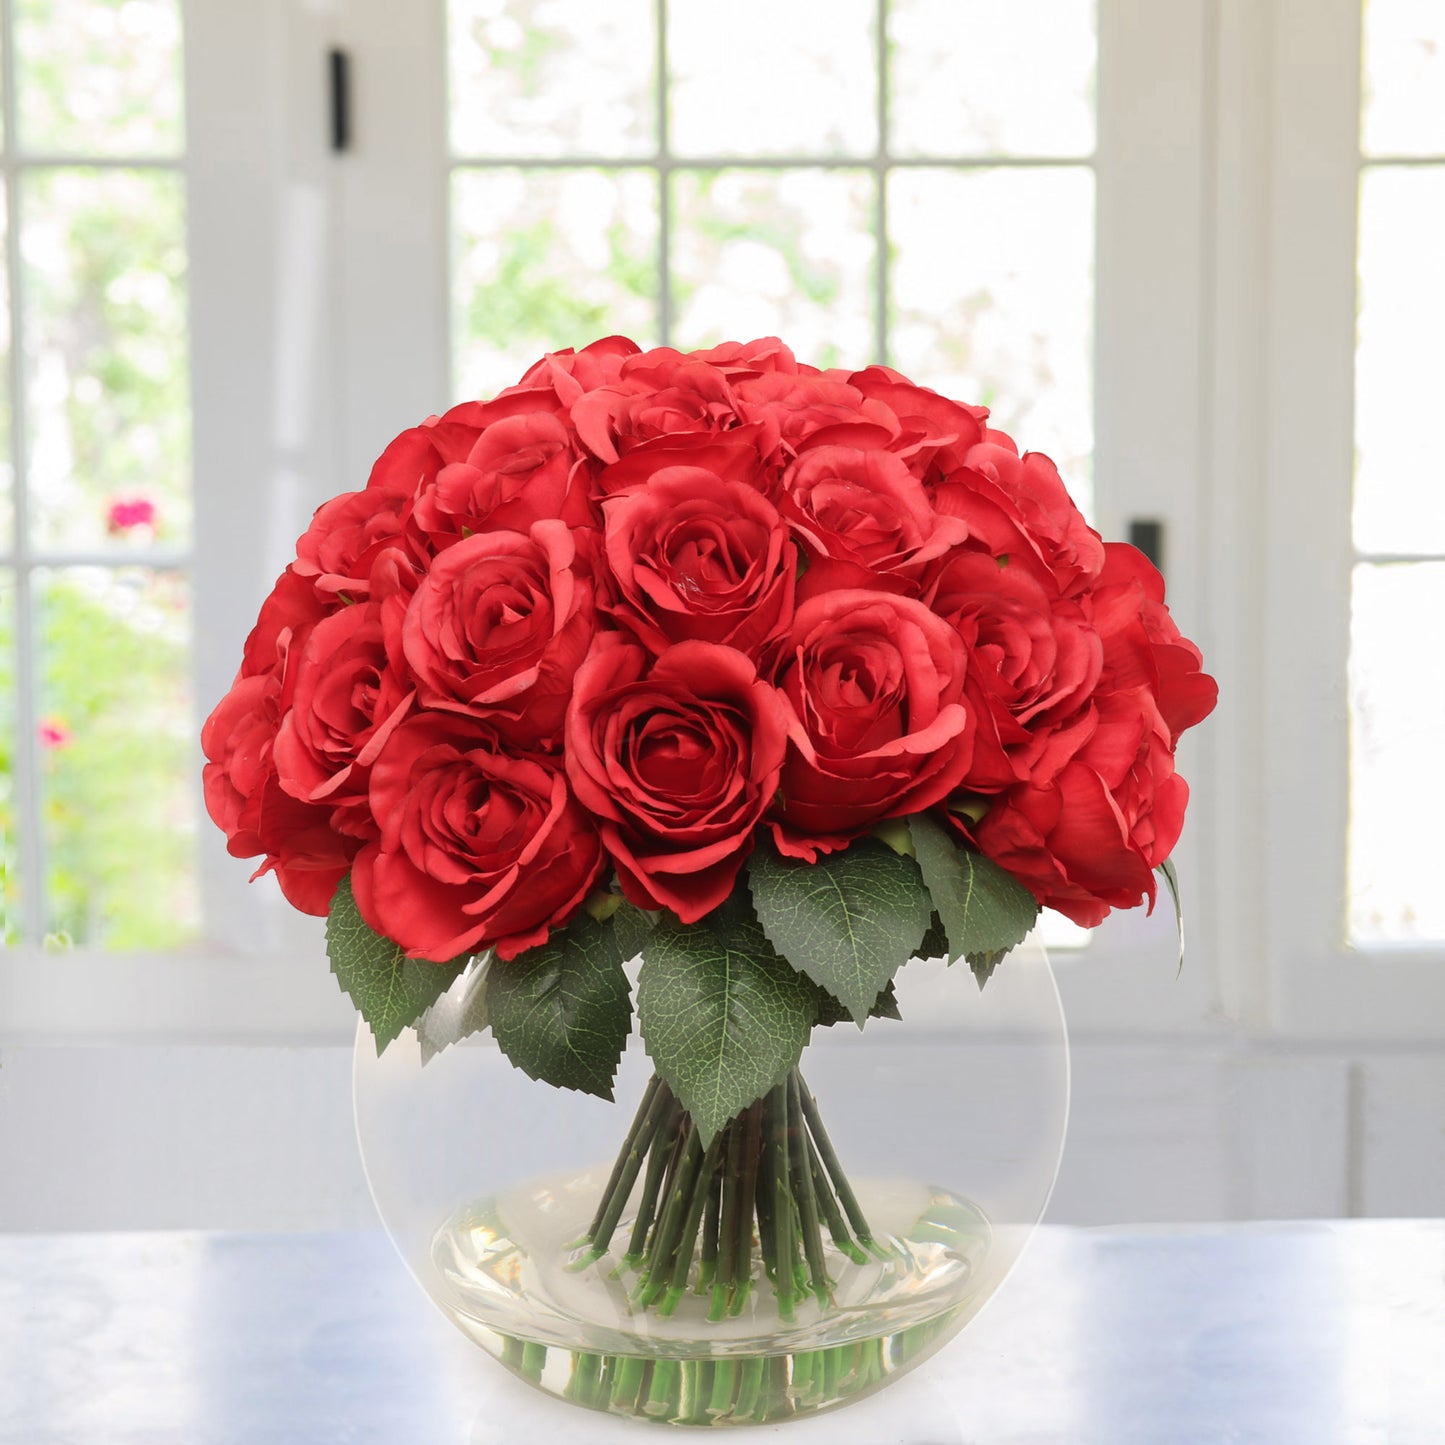 Charming Red Rose Bouquet - 36-Head Artificial Flowers in Luxurious Glass Vase - Ideal for Romantic Decor, Wedding Centerpieces, and Gift Giving